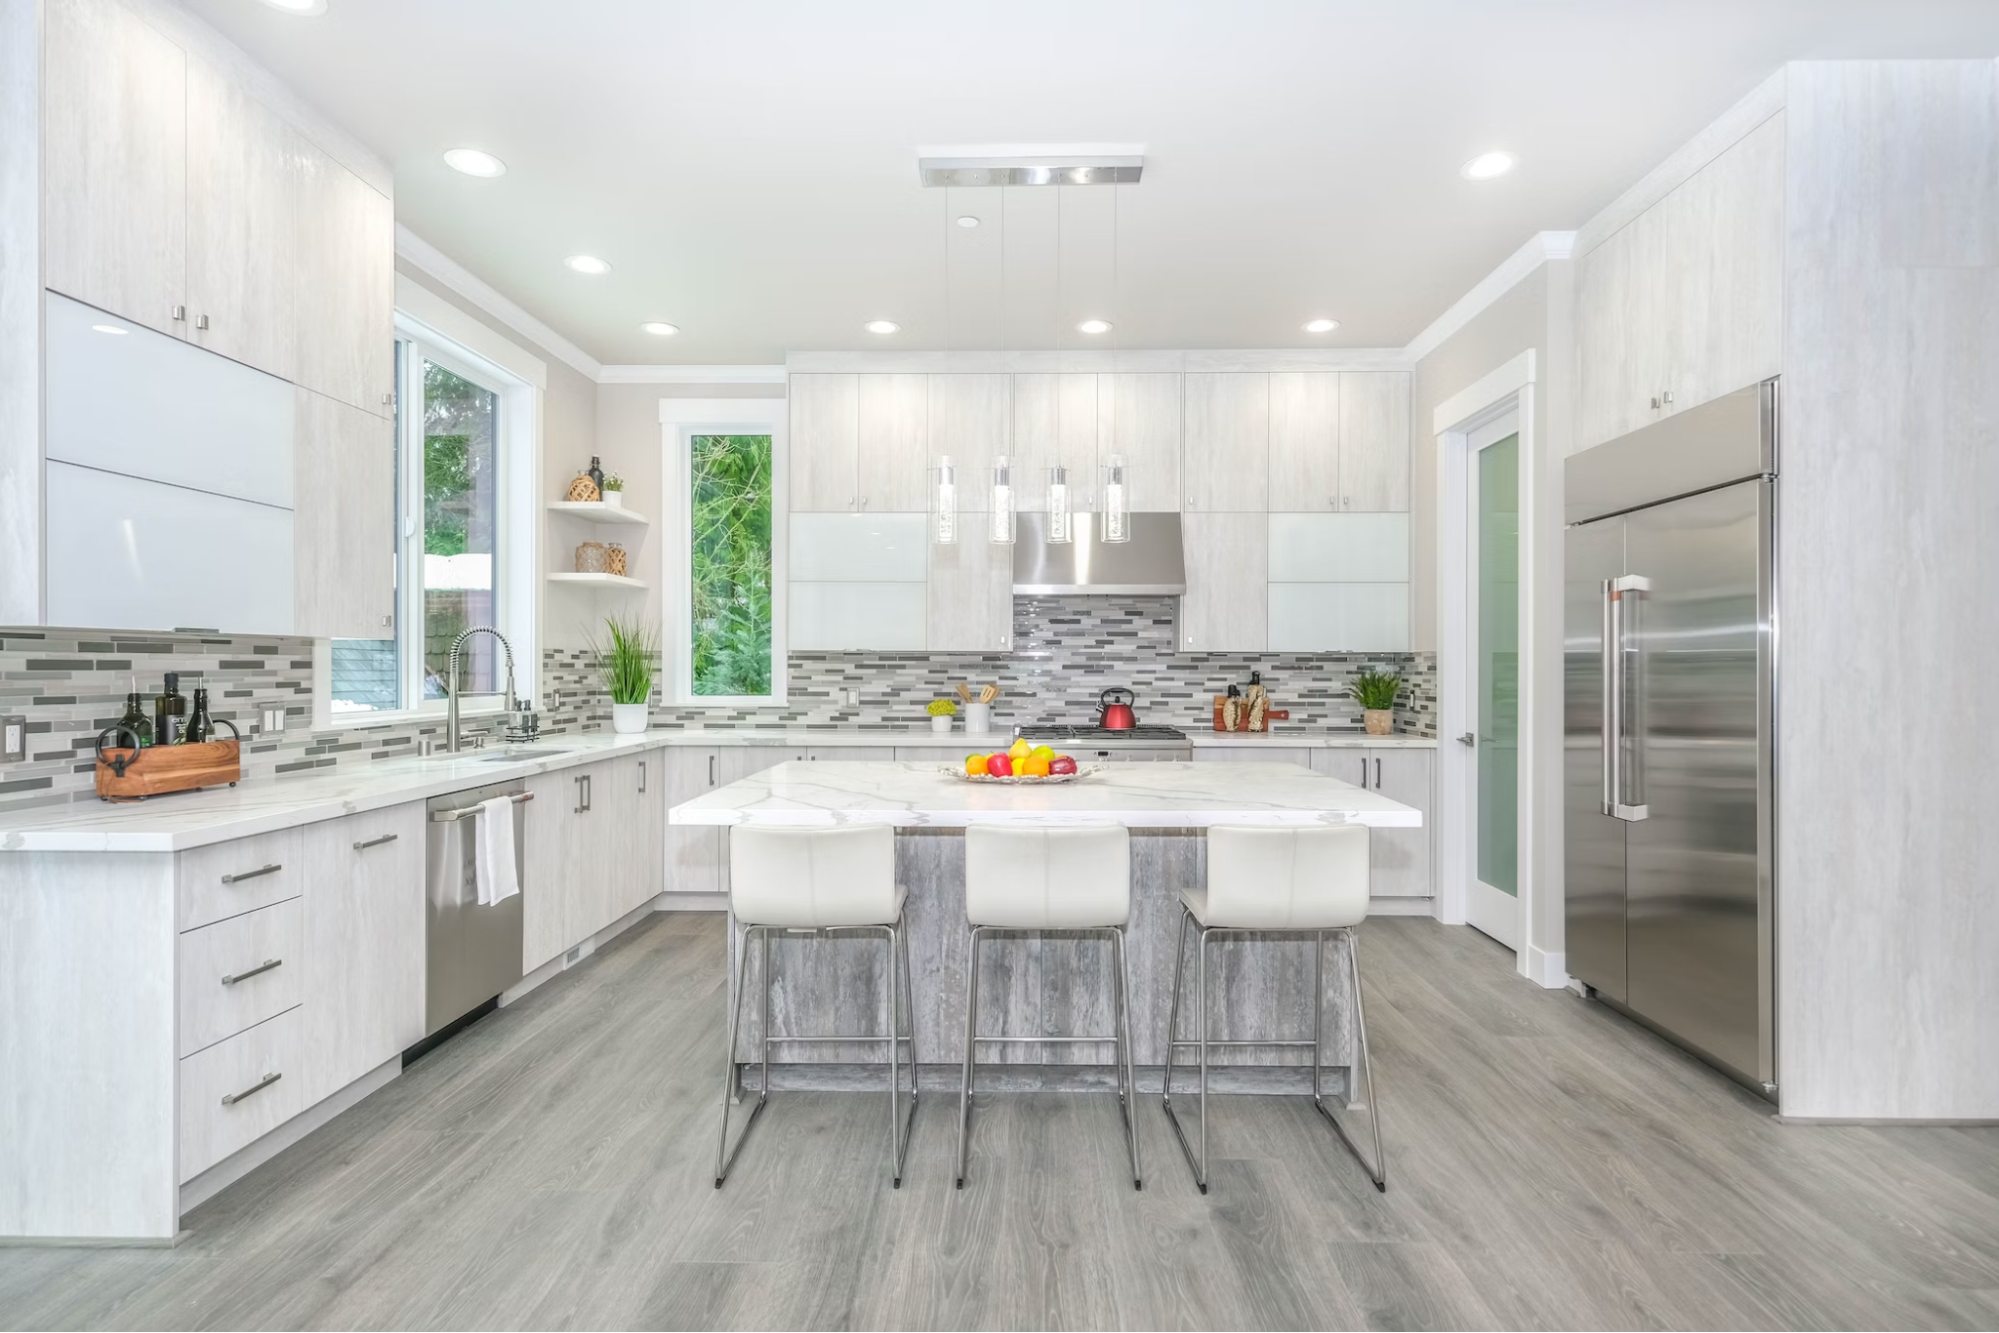 Bright kitchen ideas – tips and tricks on how to illuminate your cooking space with style, 3, eurocraftswfl.com